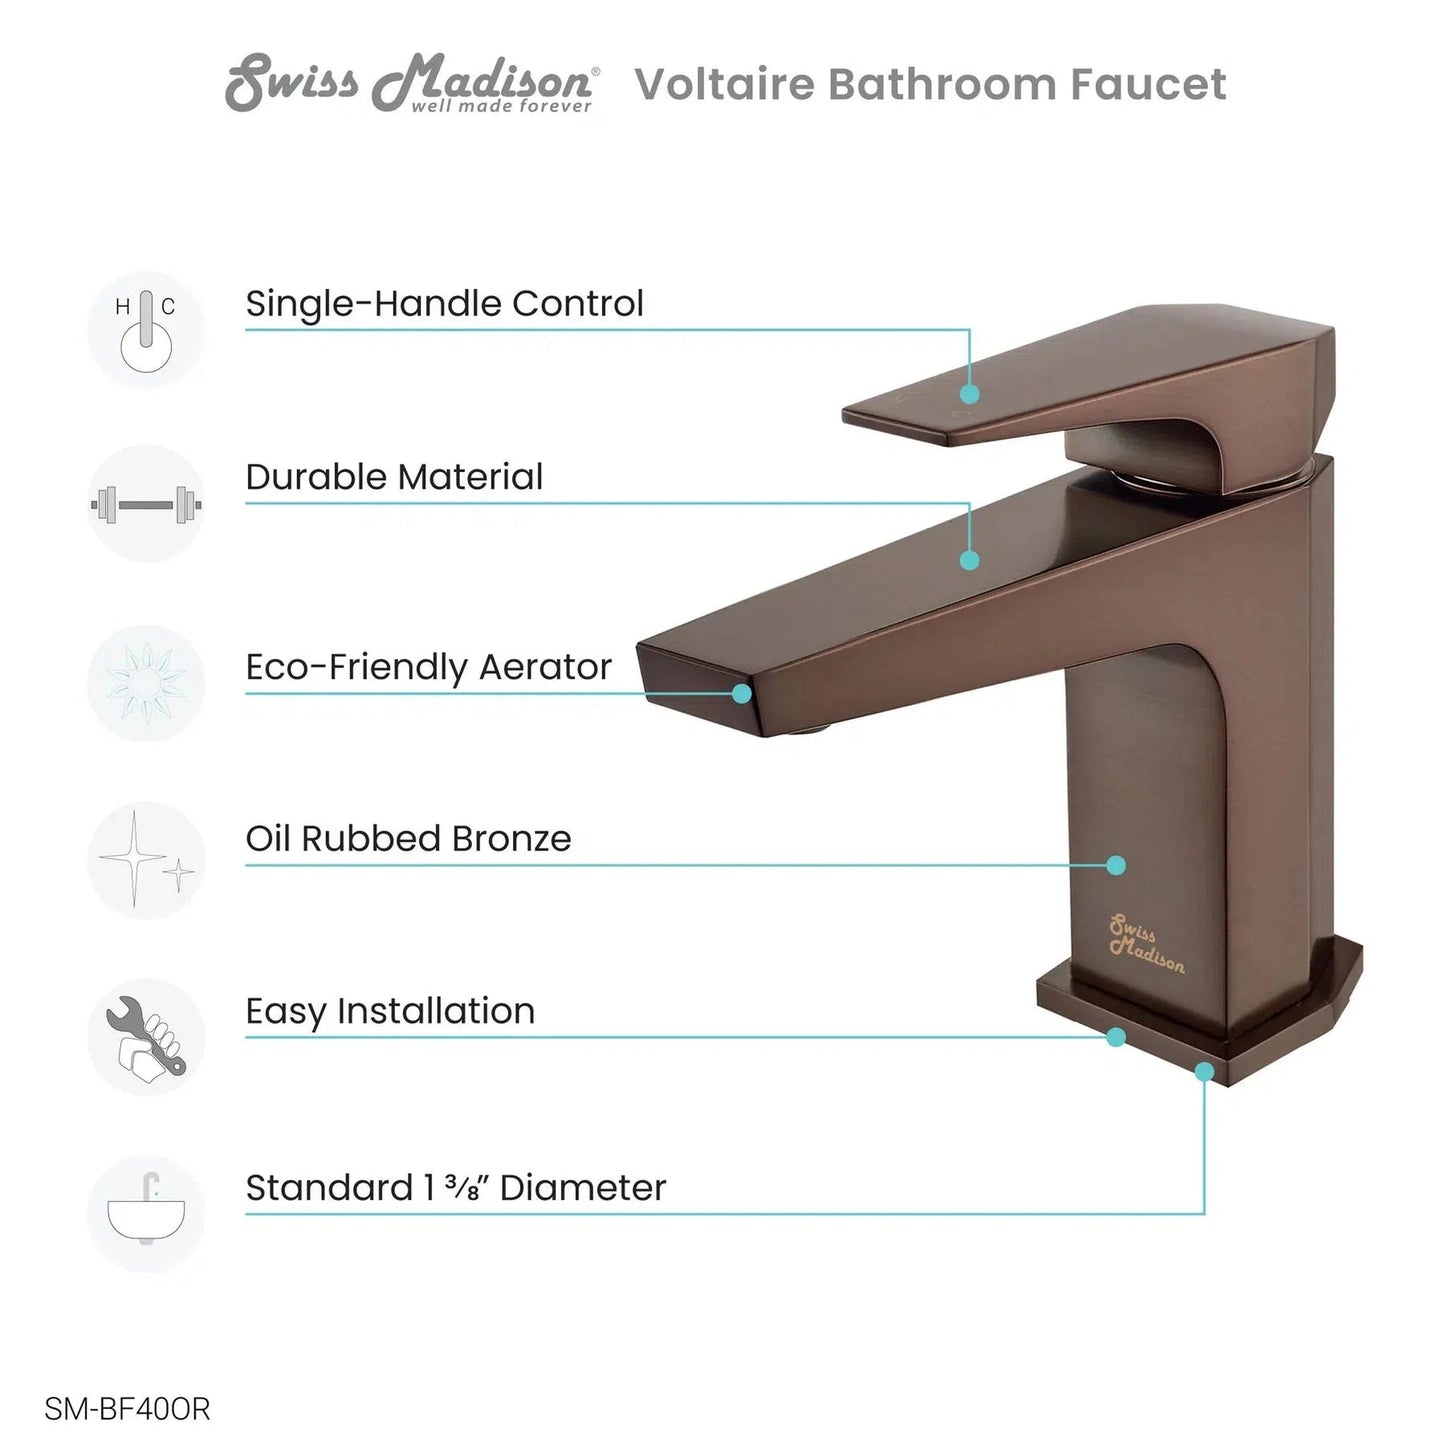 Swiss Madison Voltaire 7" Oil Rubbed Bronze Single Hole Bathroom Faucet With Flow Rate of 1.5 GPM